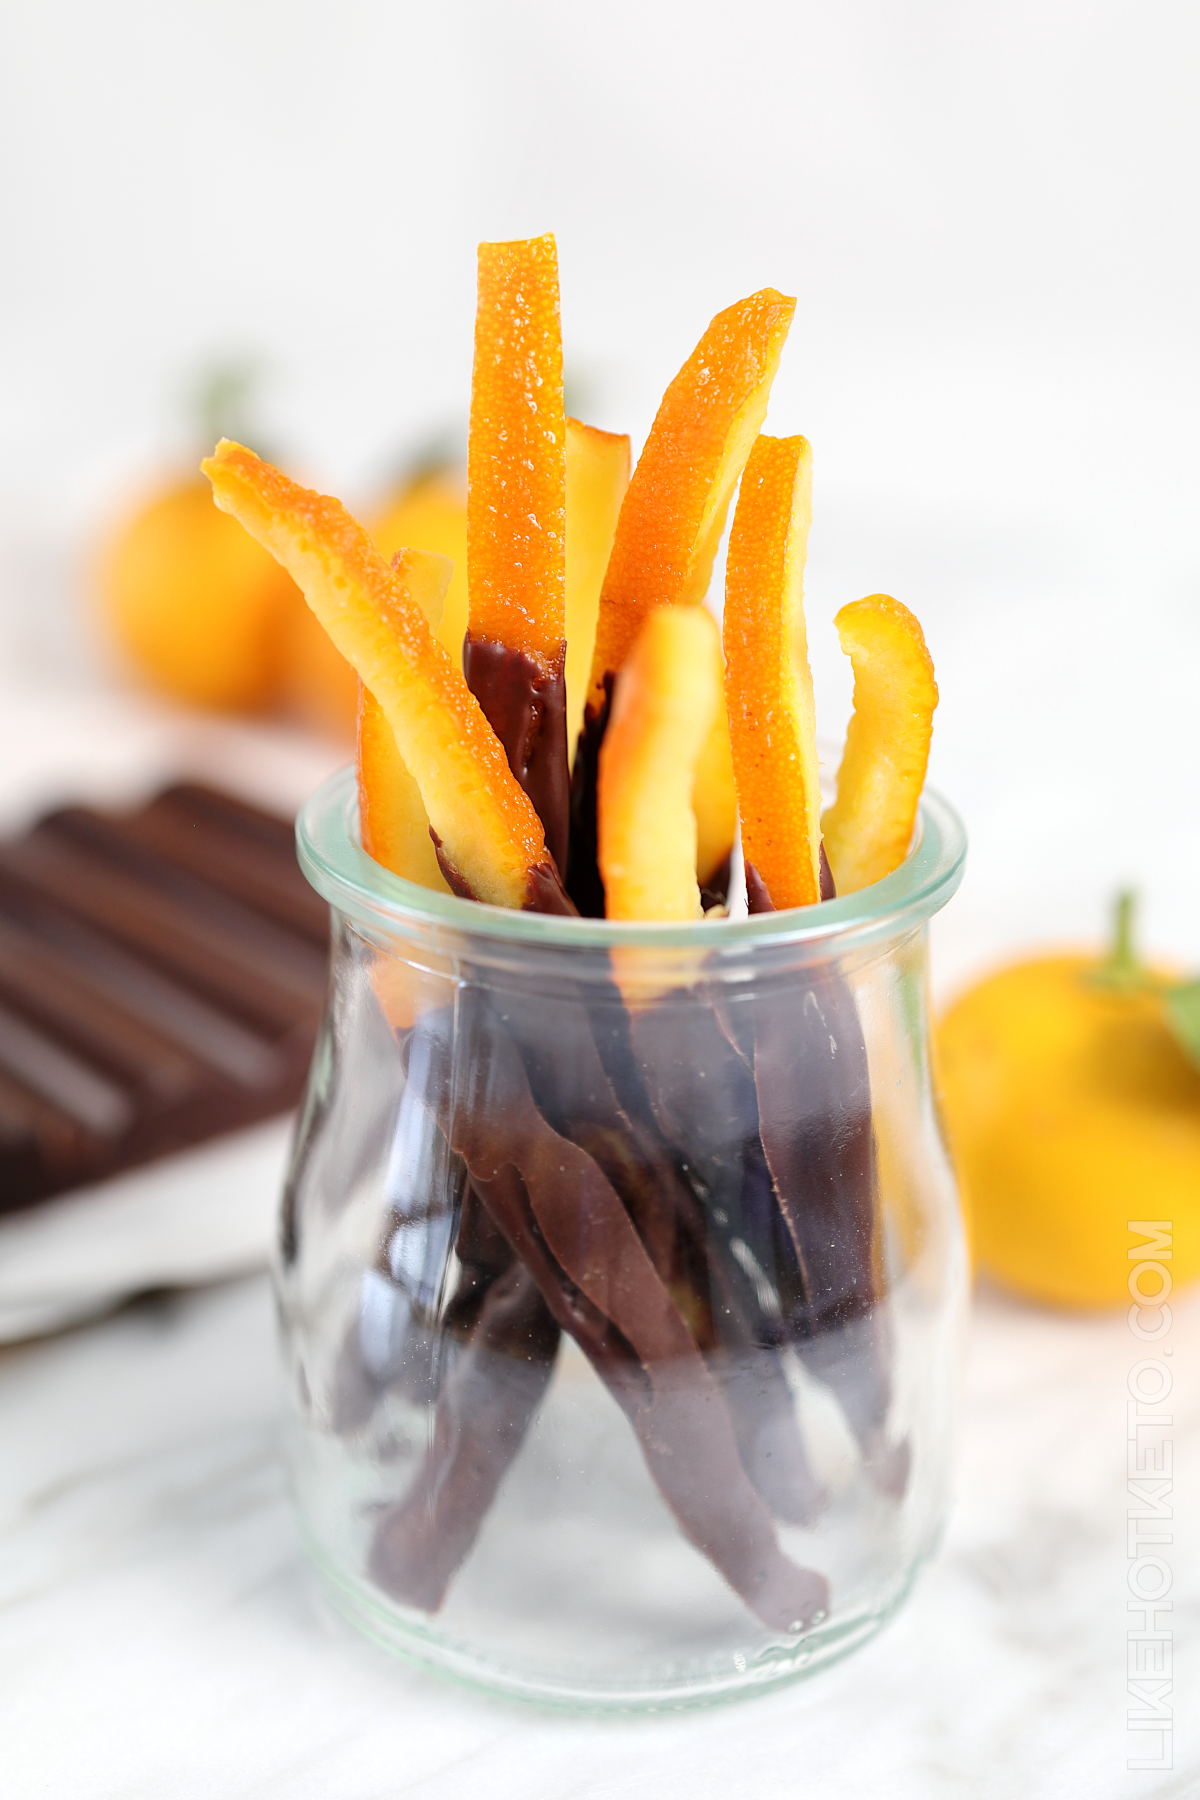 Keto candied orange peels dipped in dark chocolate in a small glass.